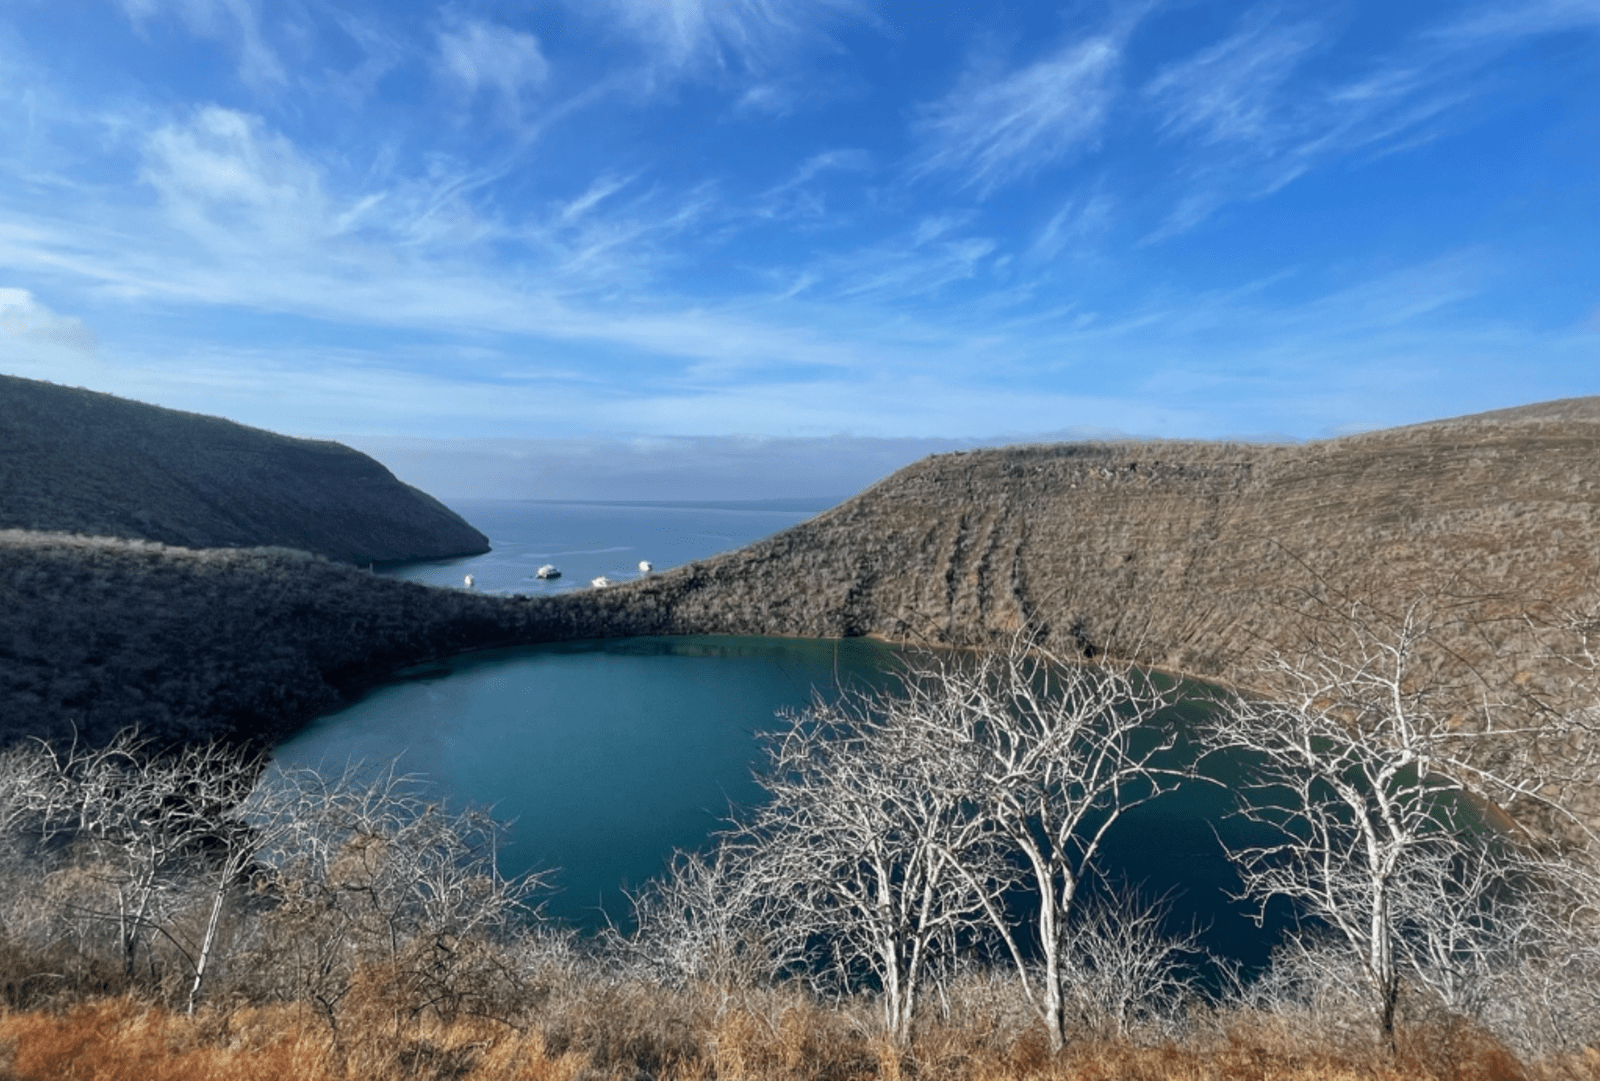 The view over a lake on the Galapagos Islands.